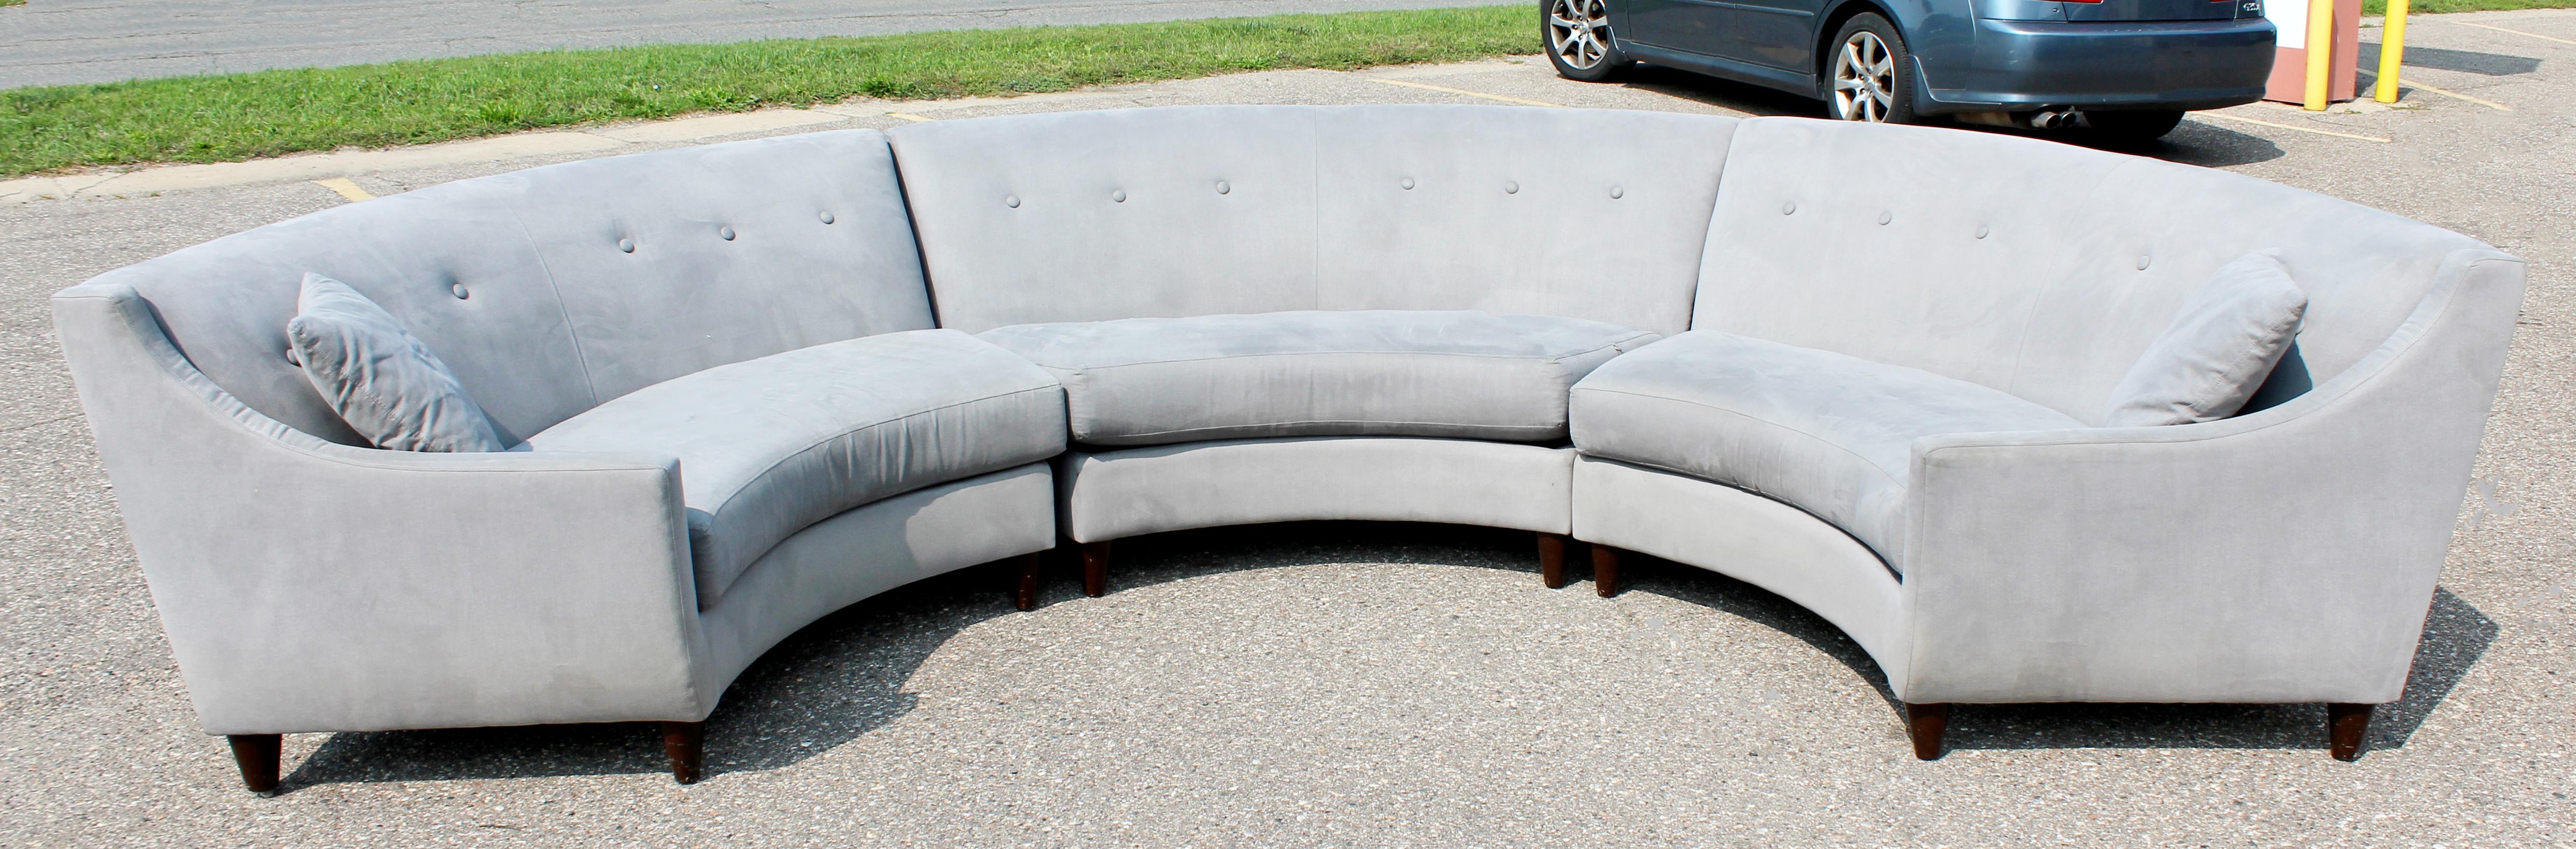 For your consideration is a magnificent, three-piece, curved, high backed sectional sofa in a dove grey upholstery, on walnut legs, in the Dunbar style. In excellent condition. The dimensions of each piece are 76